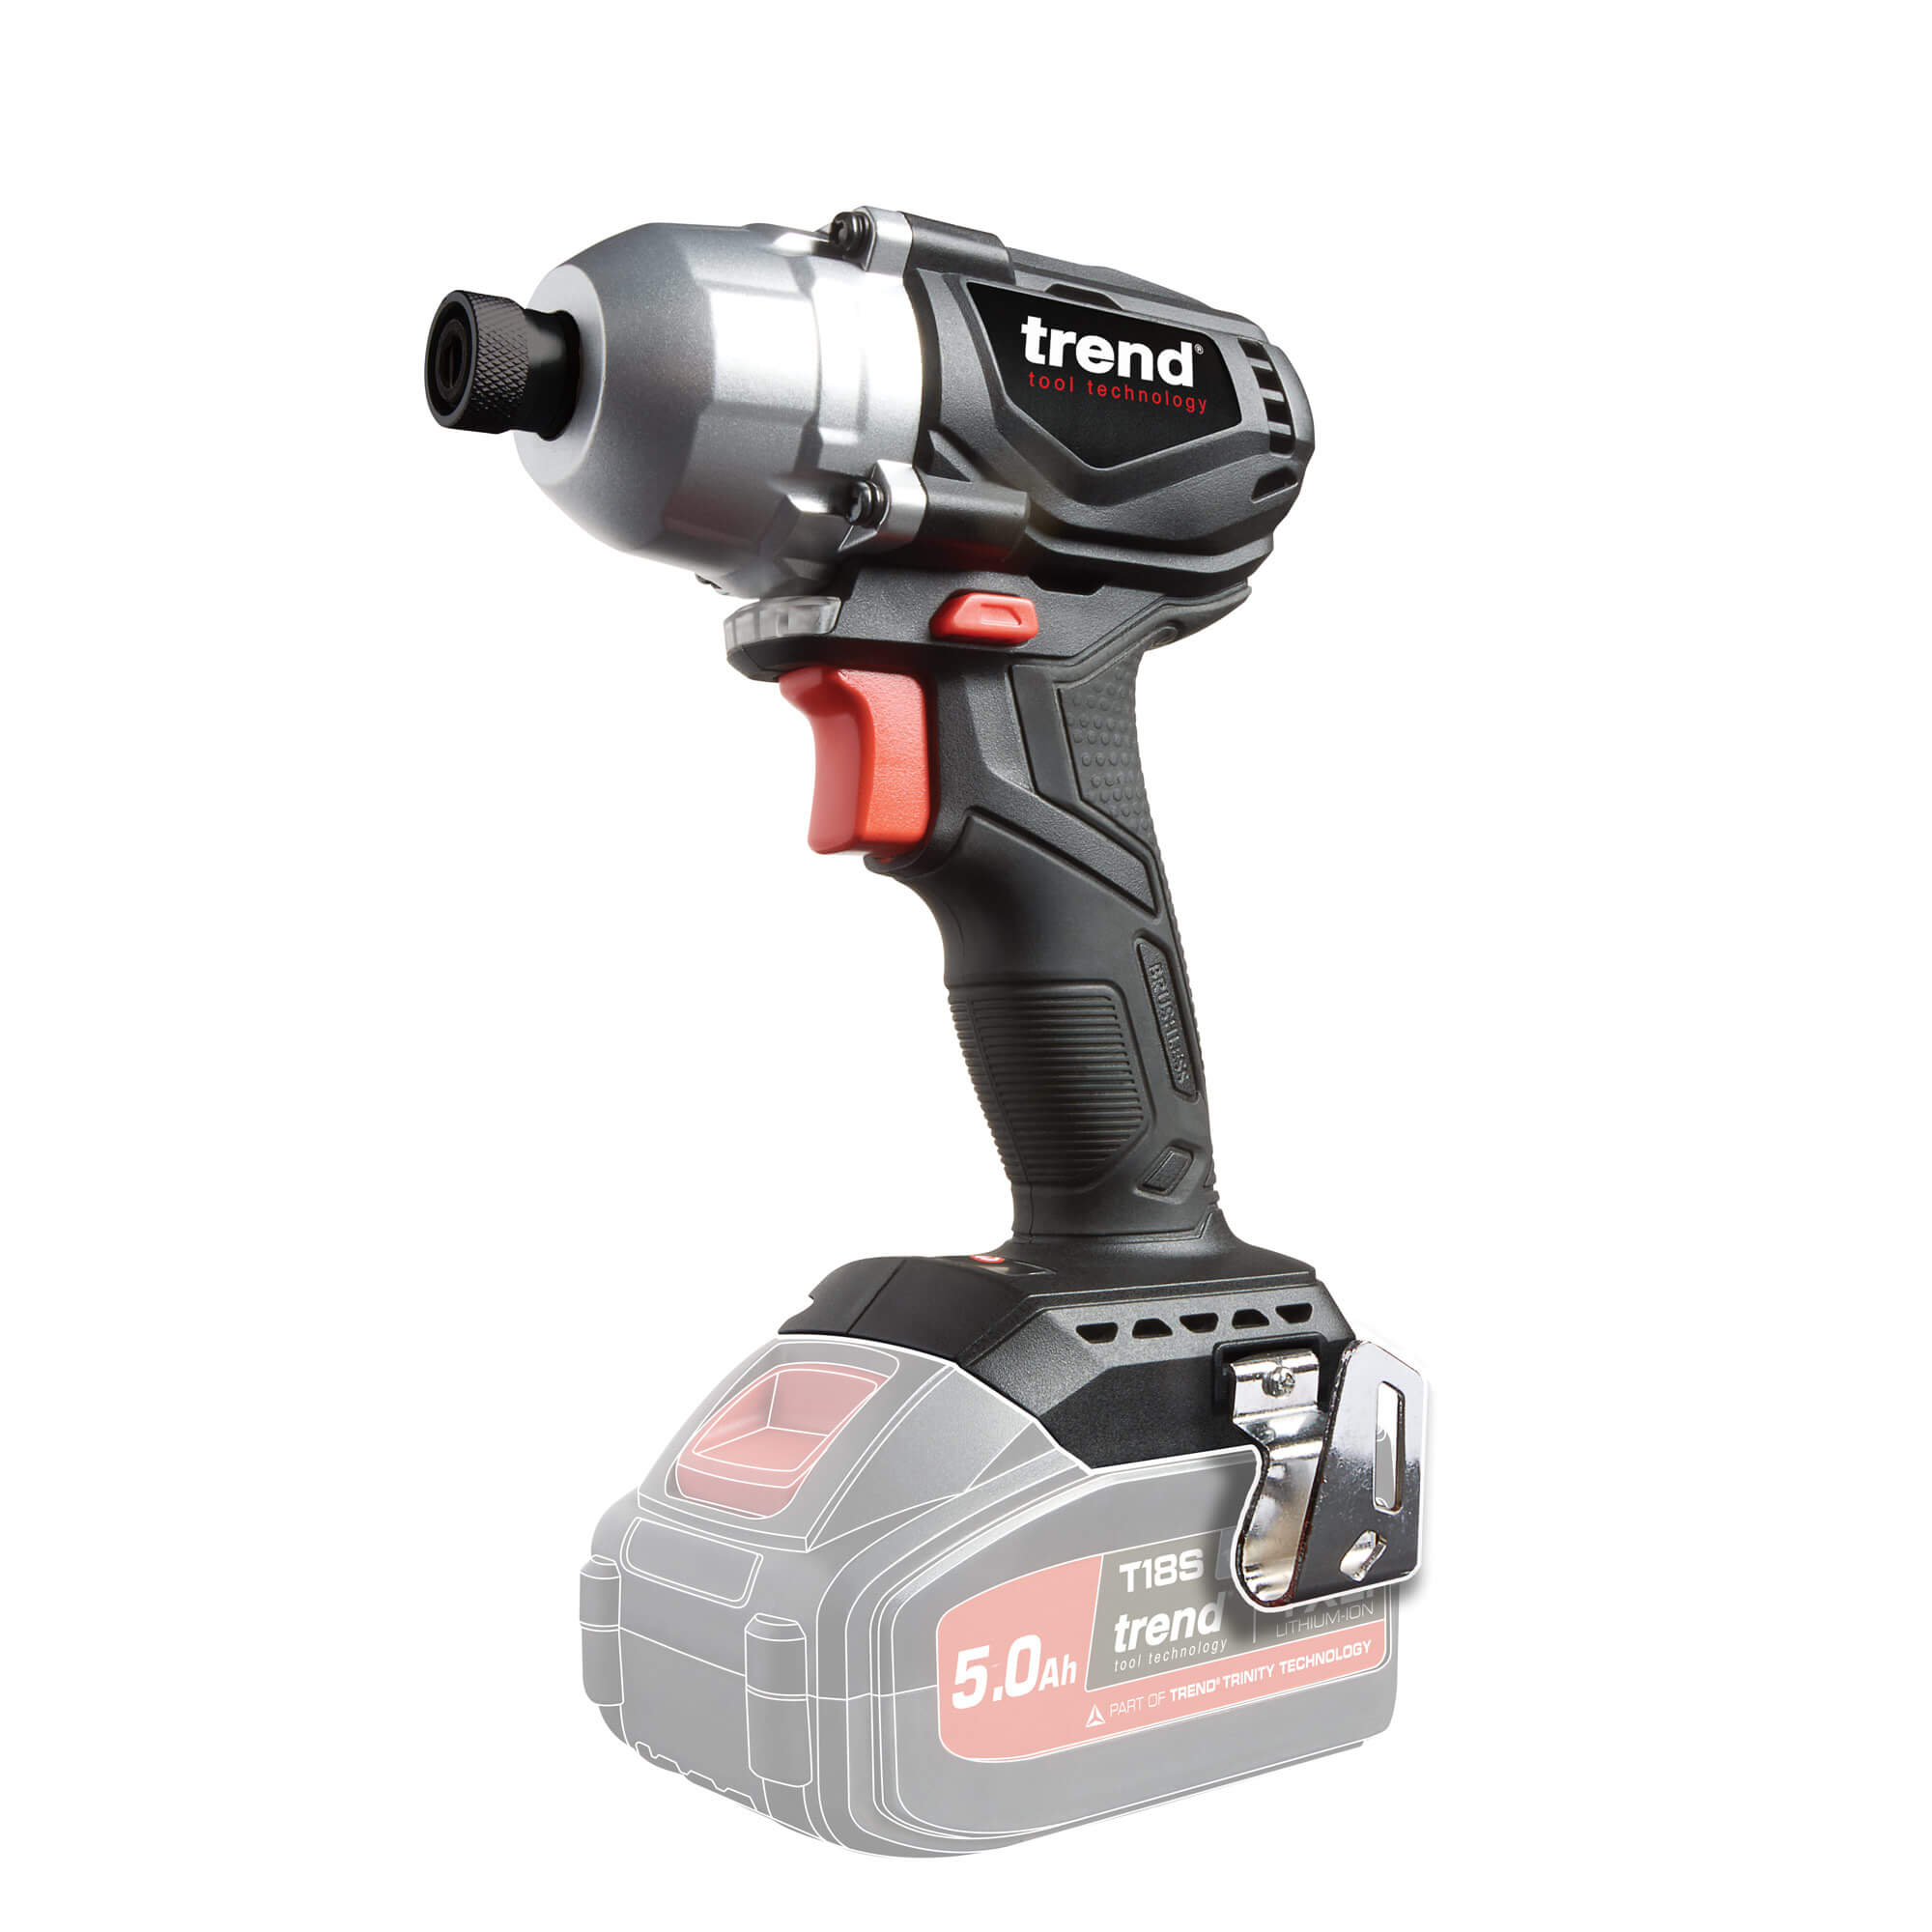 Trend T18S/IDB 18v Cordless Brushless Impact Driver No Batteries No Charger No Case